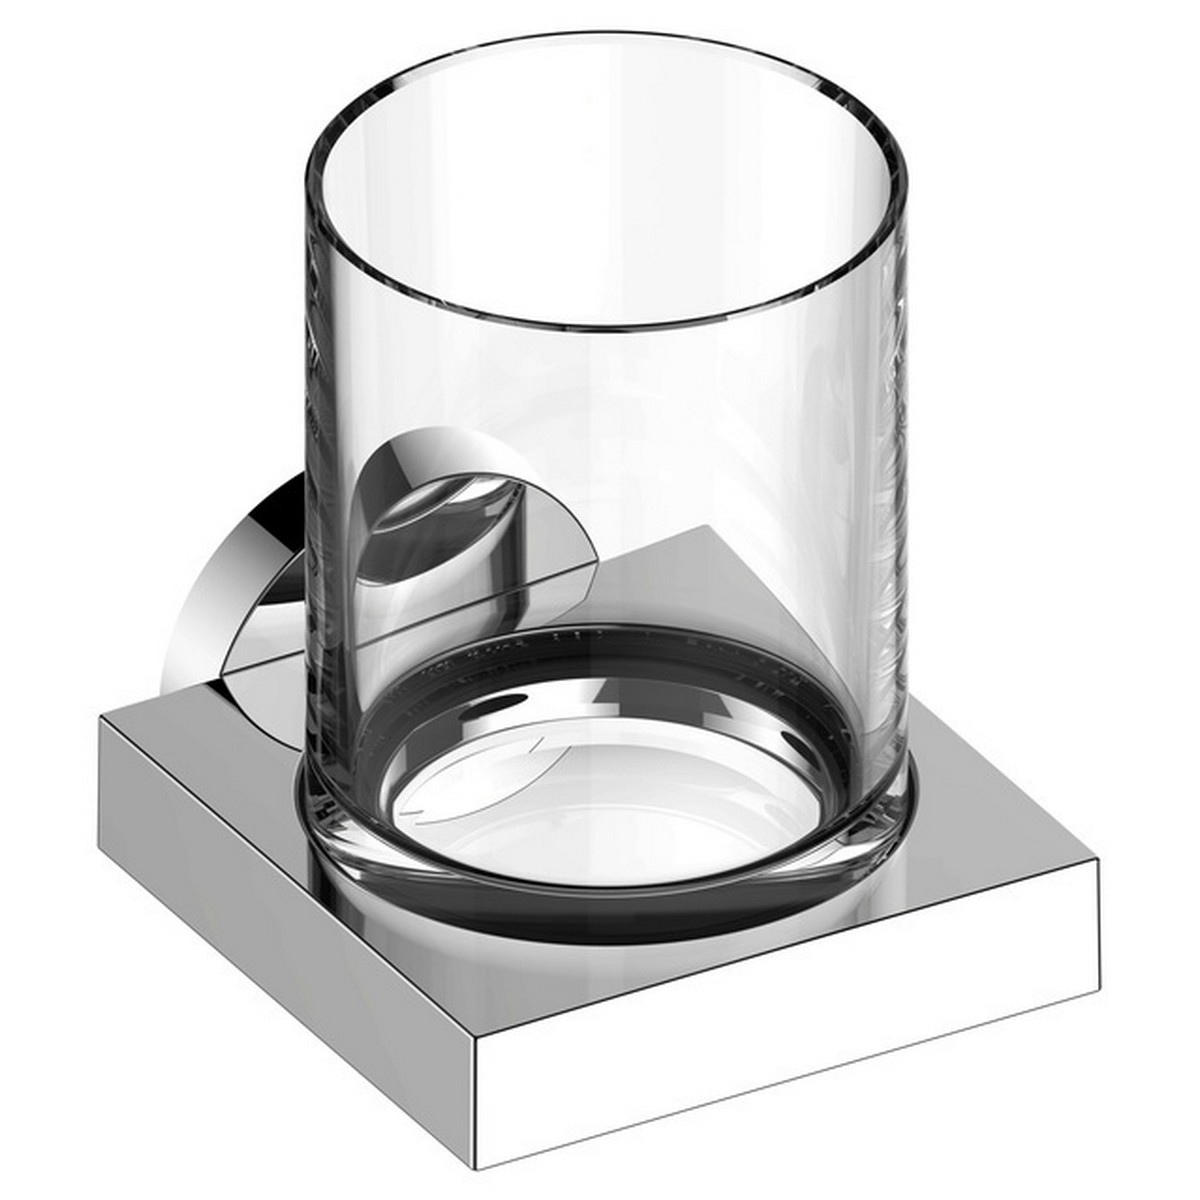 KEUCO 19050019000 EDITION 90 3 5/8 INCH WALL MOUNTED TUMBLER HOLDER IN POLISHED CHROME